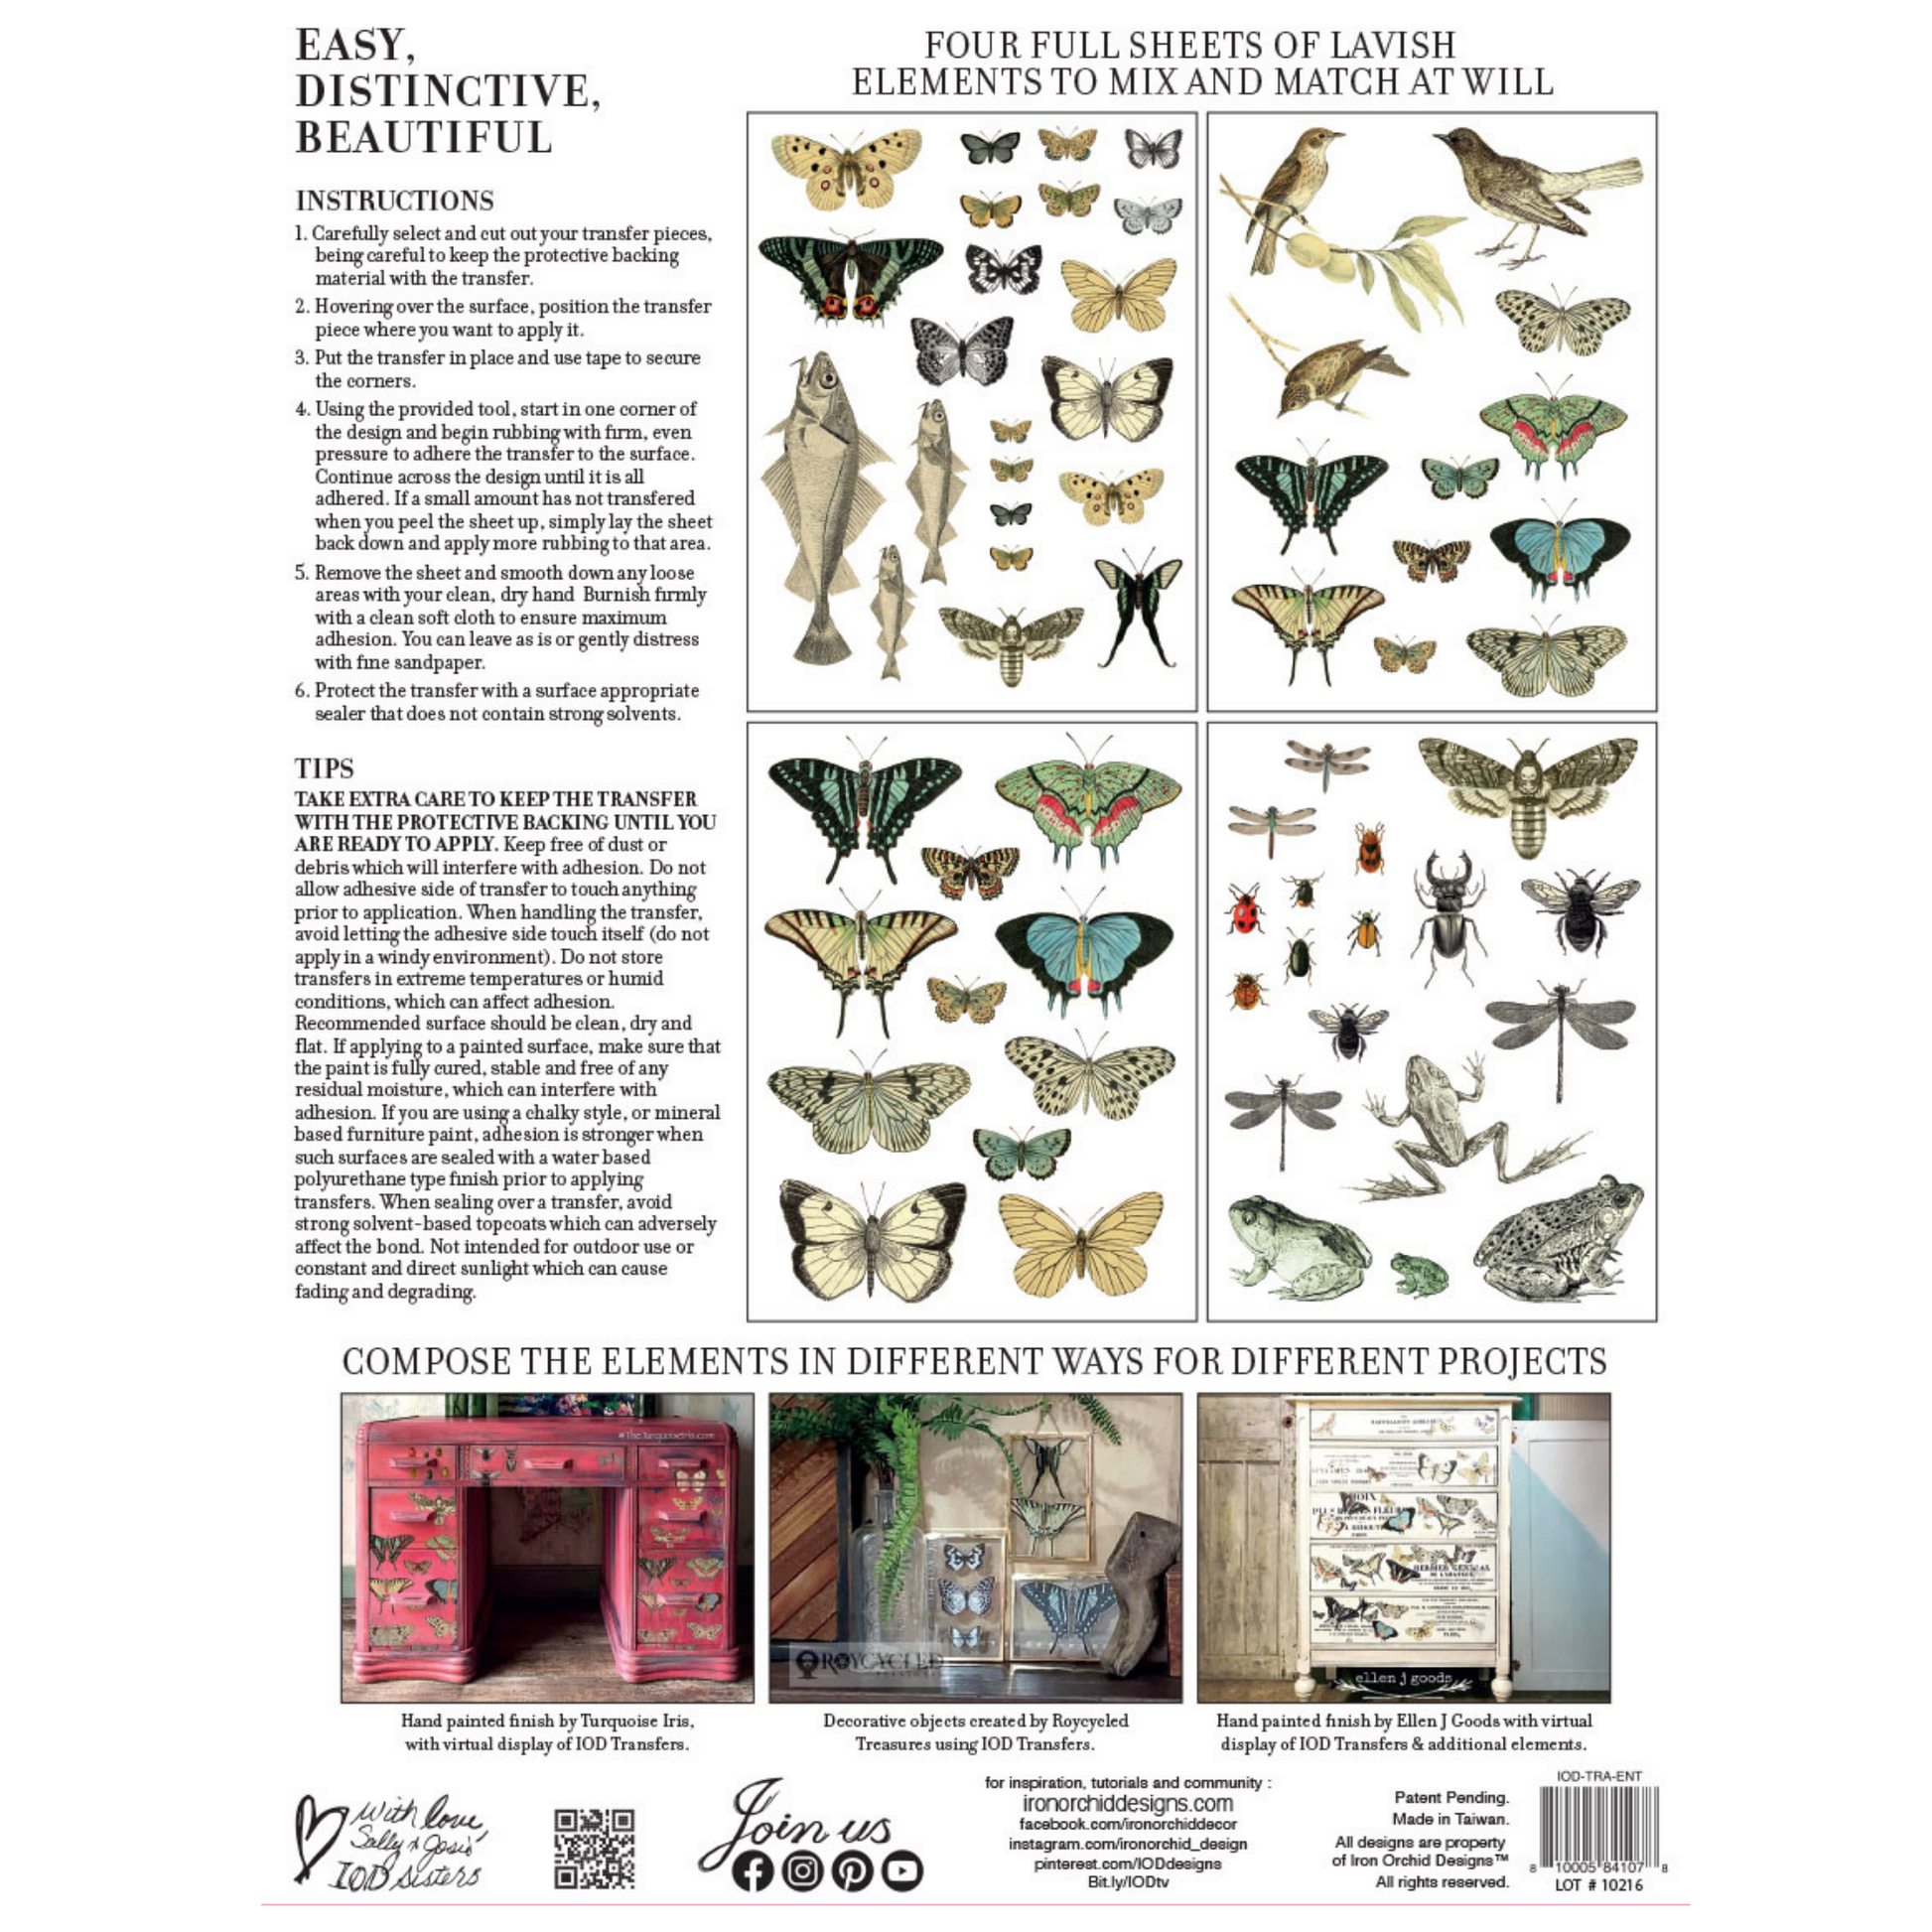 Back cover for Entomology Etcetera IOD transfer pad by Iron Orchid Designs. Four 12x16 sheets. Multiple colored butterflies, frogs and winged creatures in multiple sizes, colors and varieties. Available at Milton's Daughter